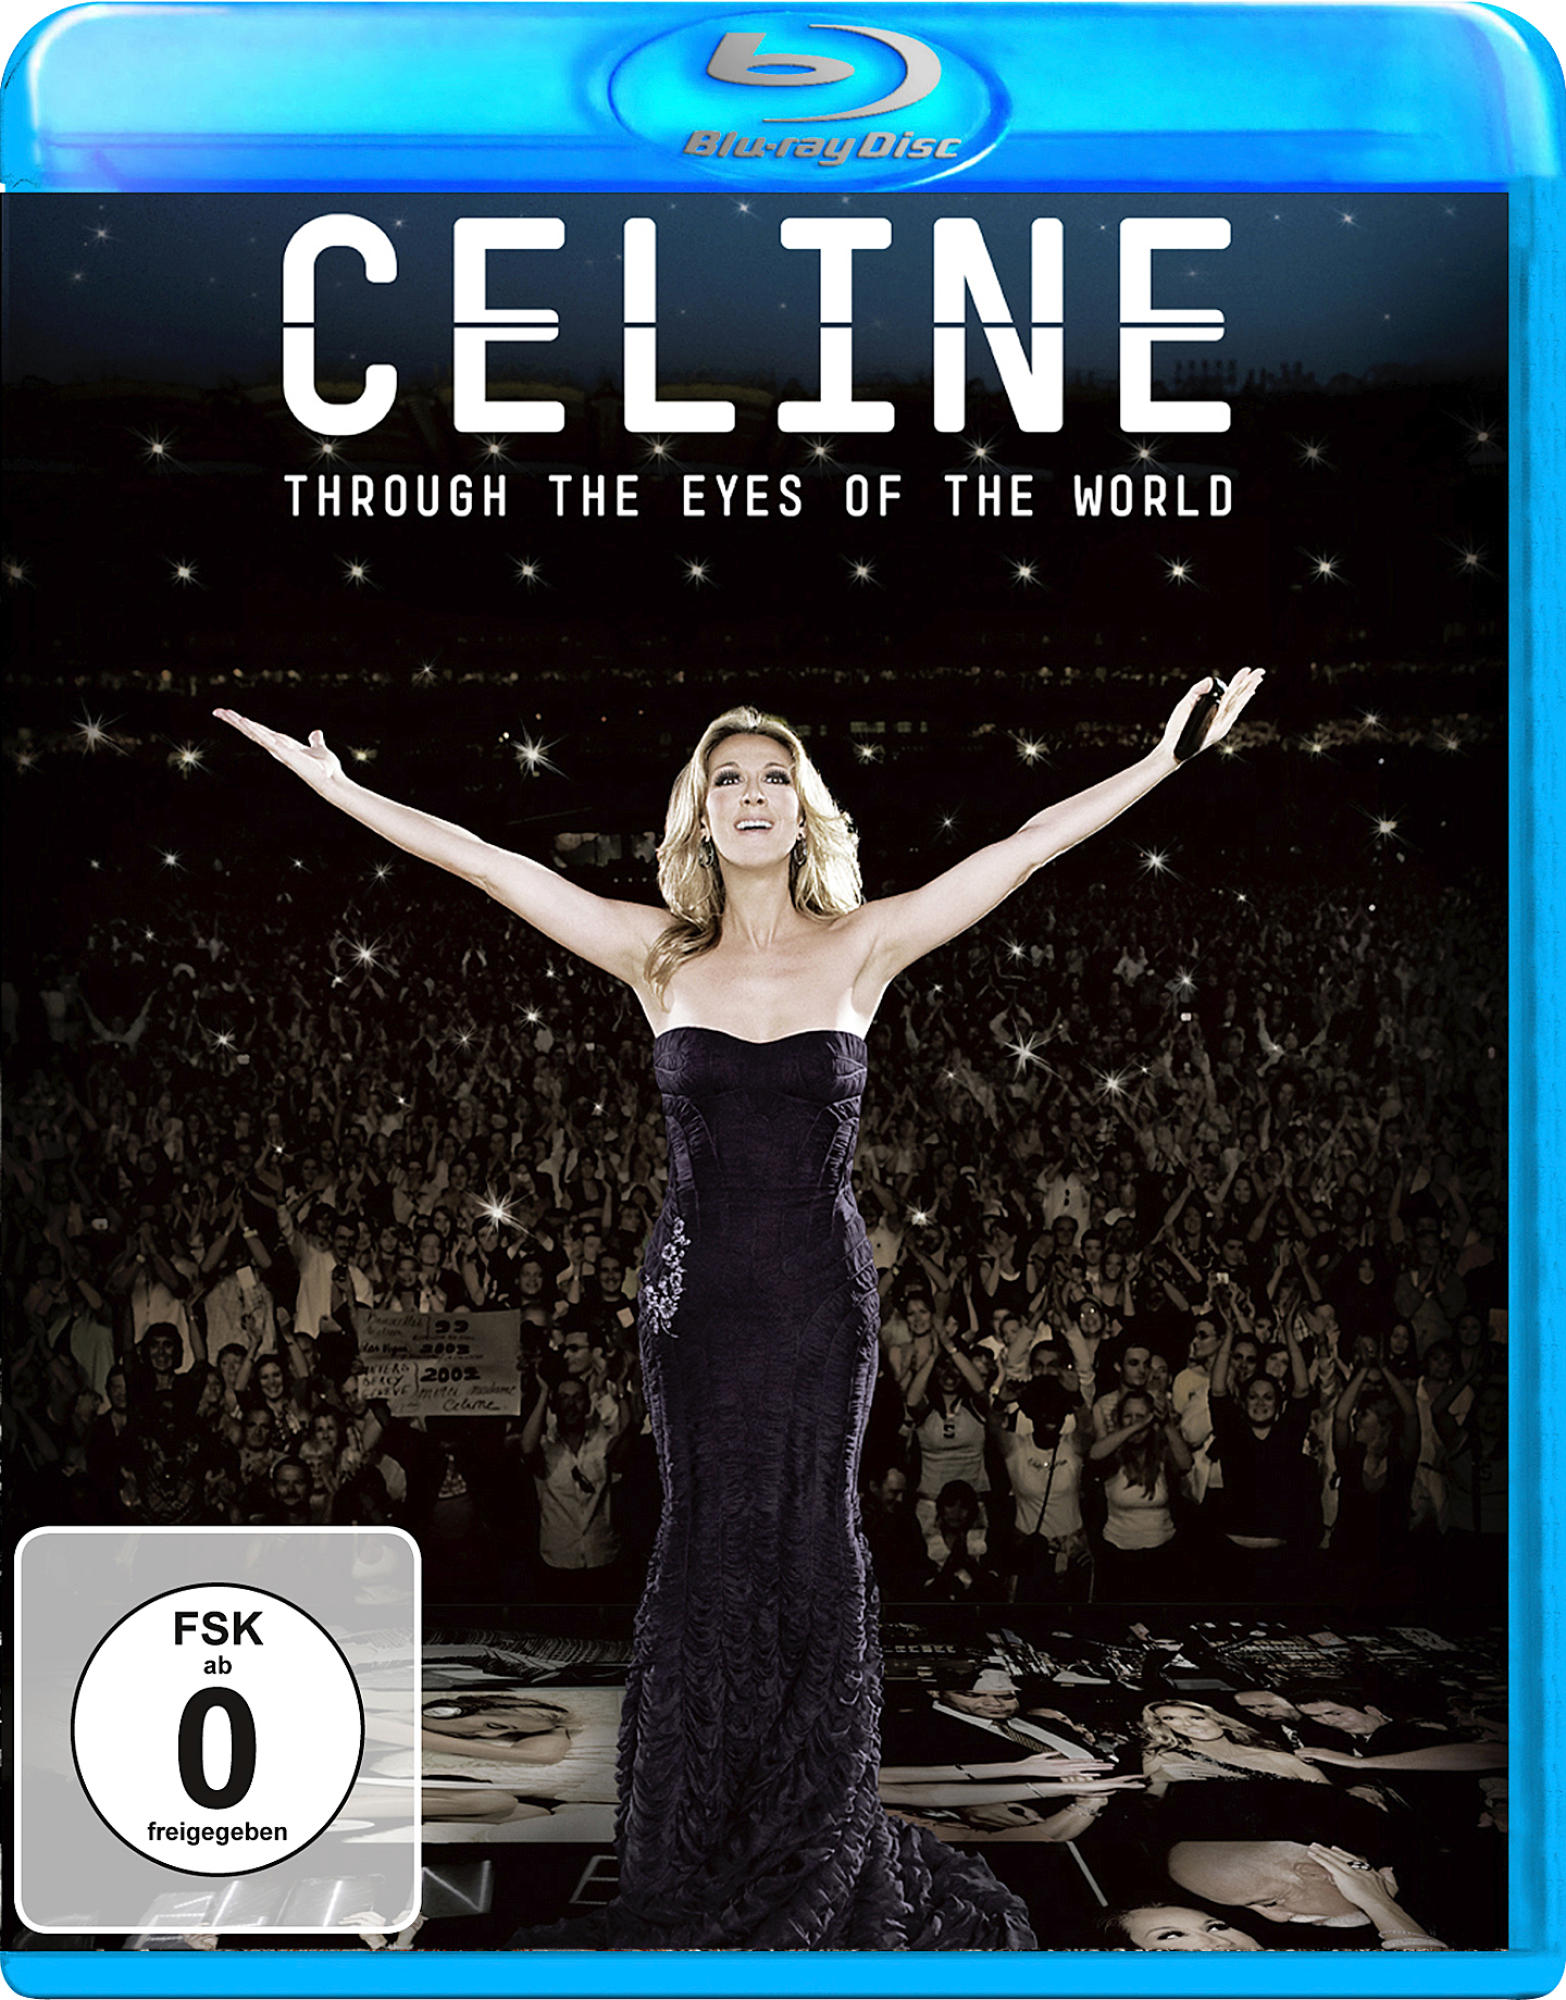 Céline Dion - THE THE OF WORLD EYES THROUGH - (Blu-ray)